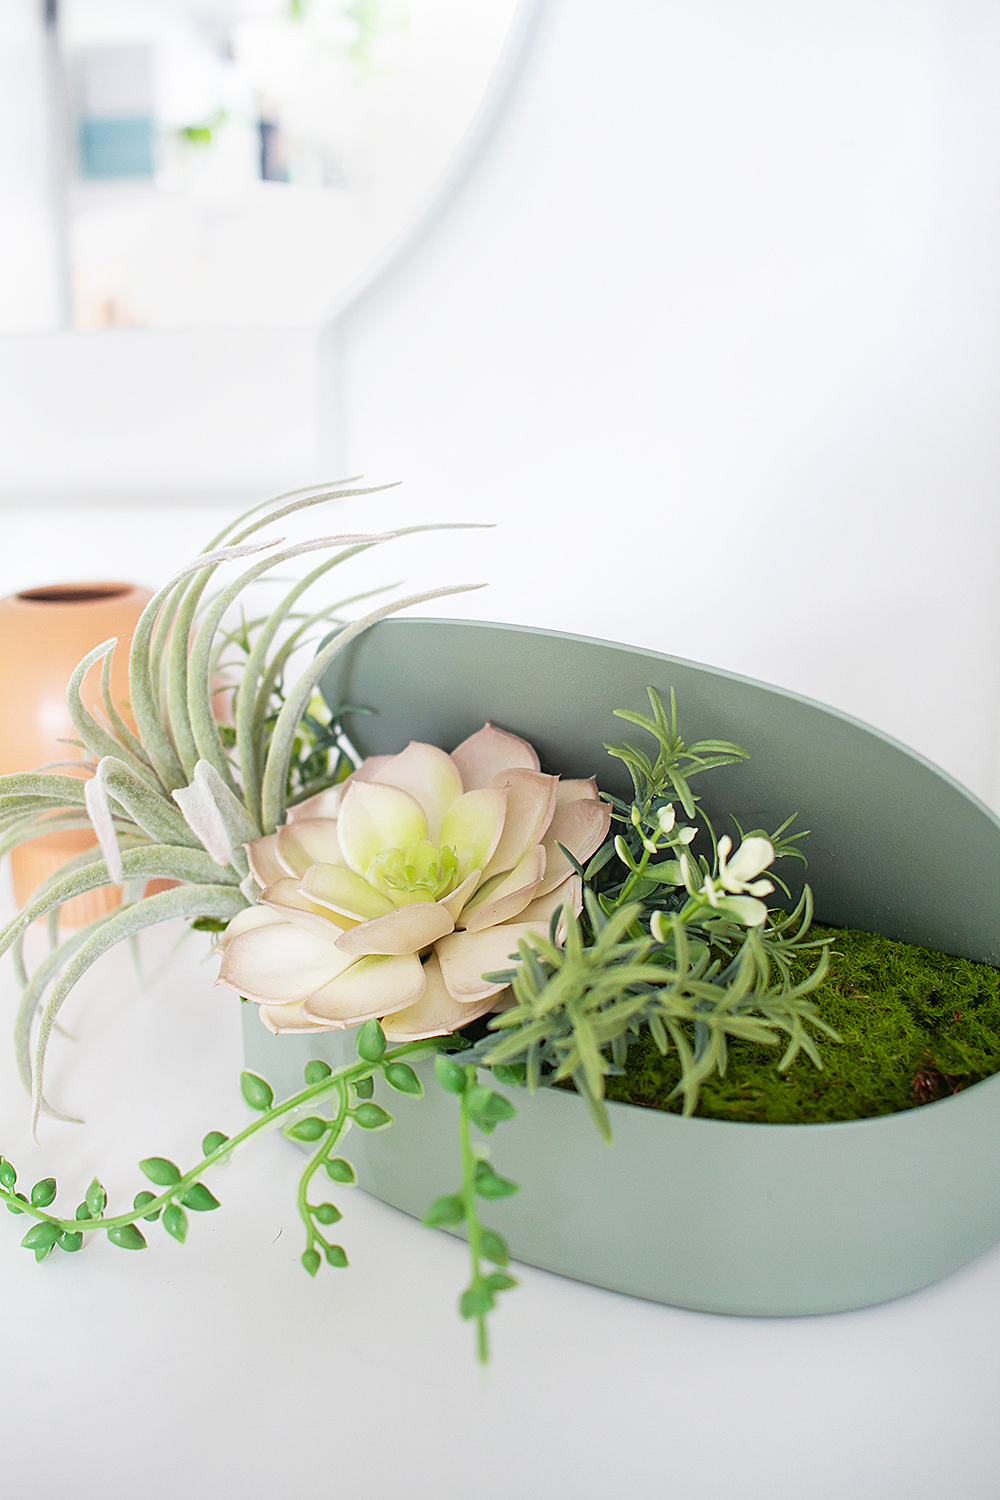 IKEA Hack: Make a DIY Faux Succulent Planter from a Box